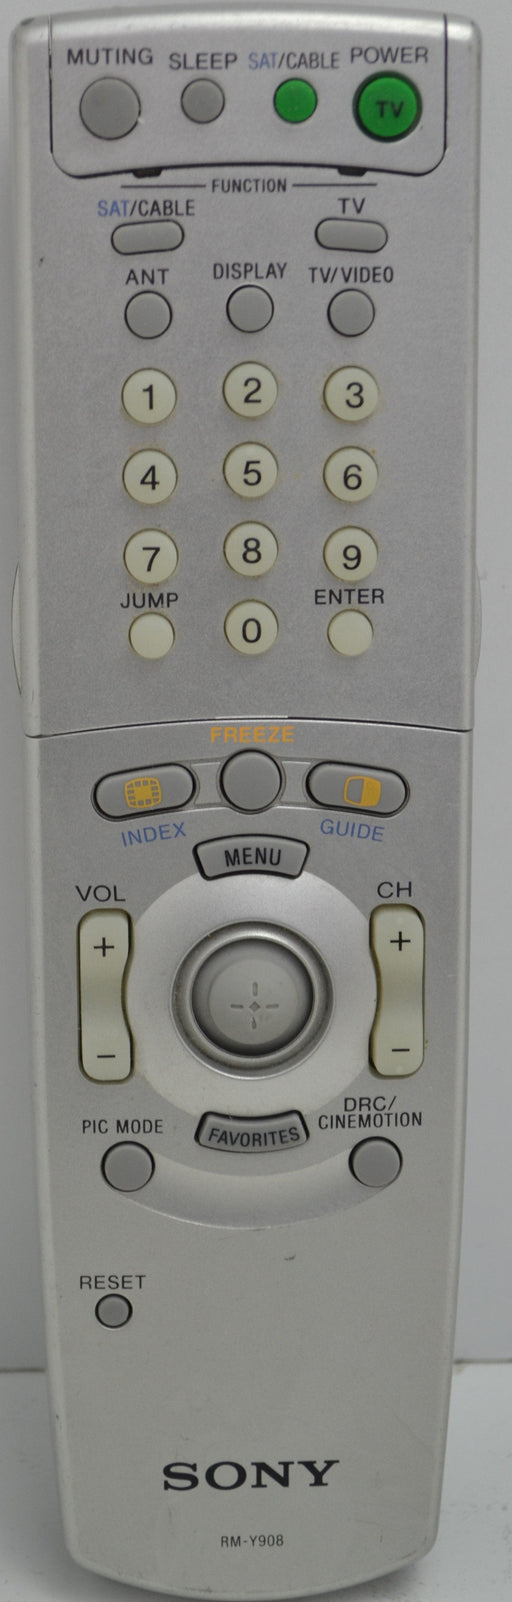 Sony RM-Y908 Remote Control for Television KP-61HS20 and More-Remote-SpenCertified-refurbished-vintage-electonics